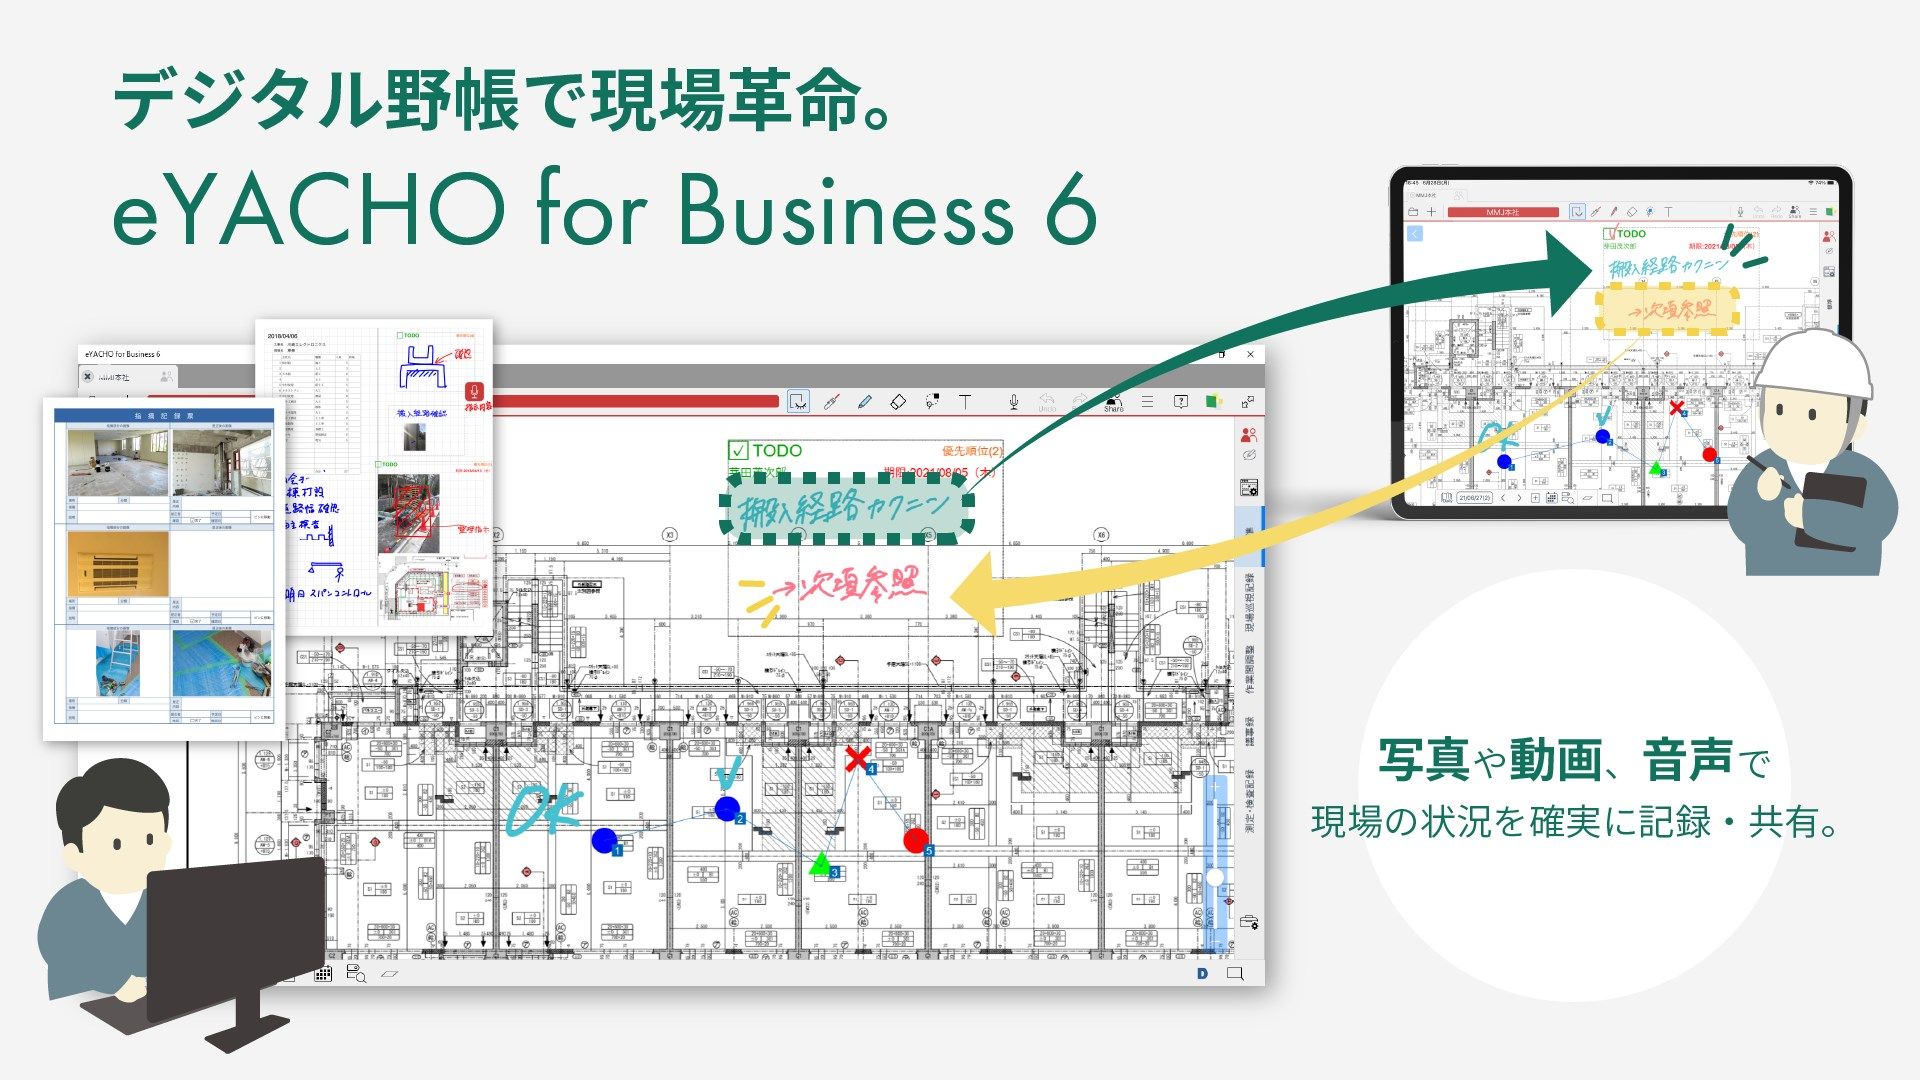 eYACHO for Business 6